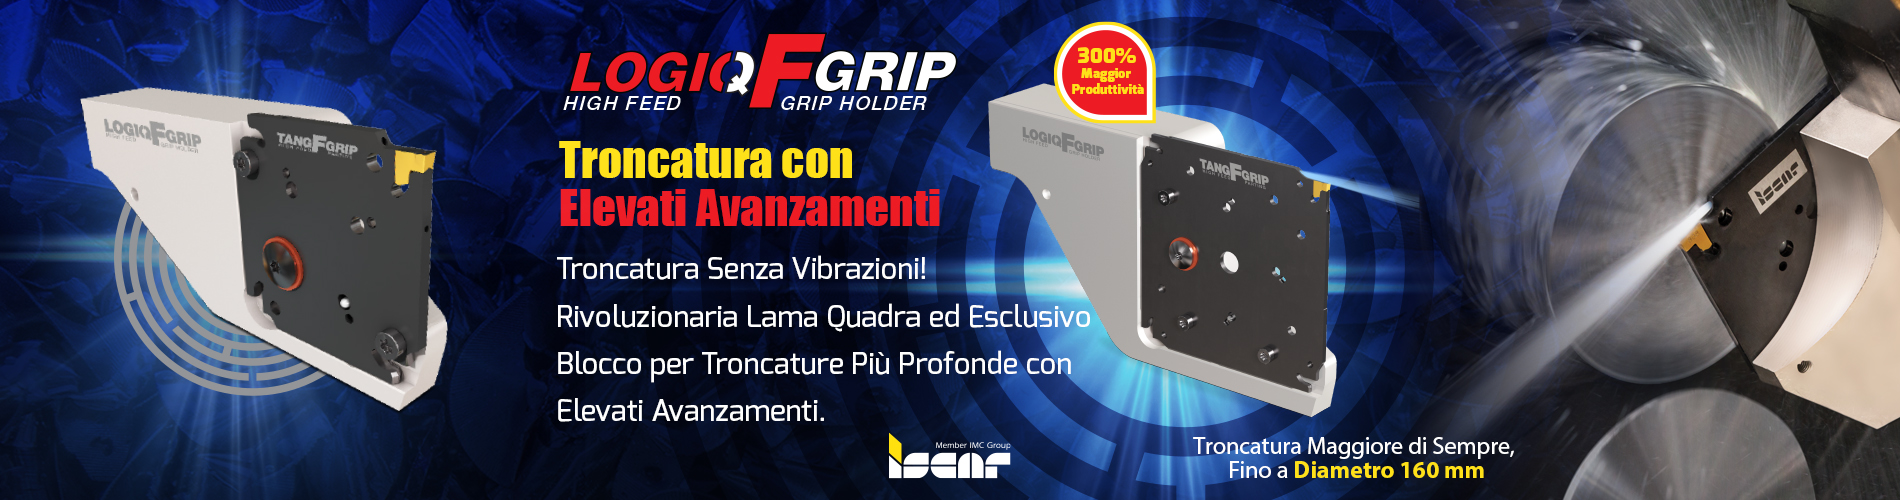 LOGIQFGRIP_Banners_ITALY